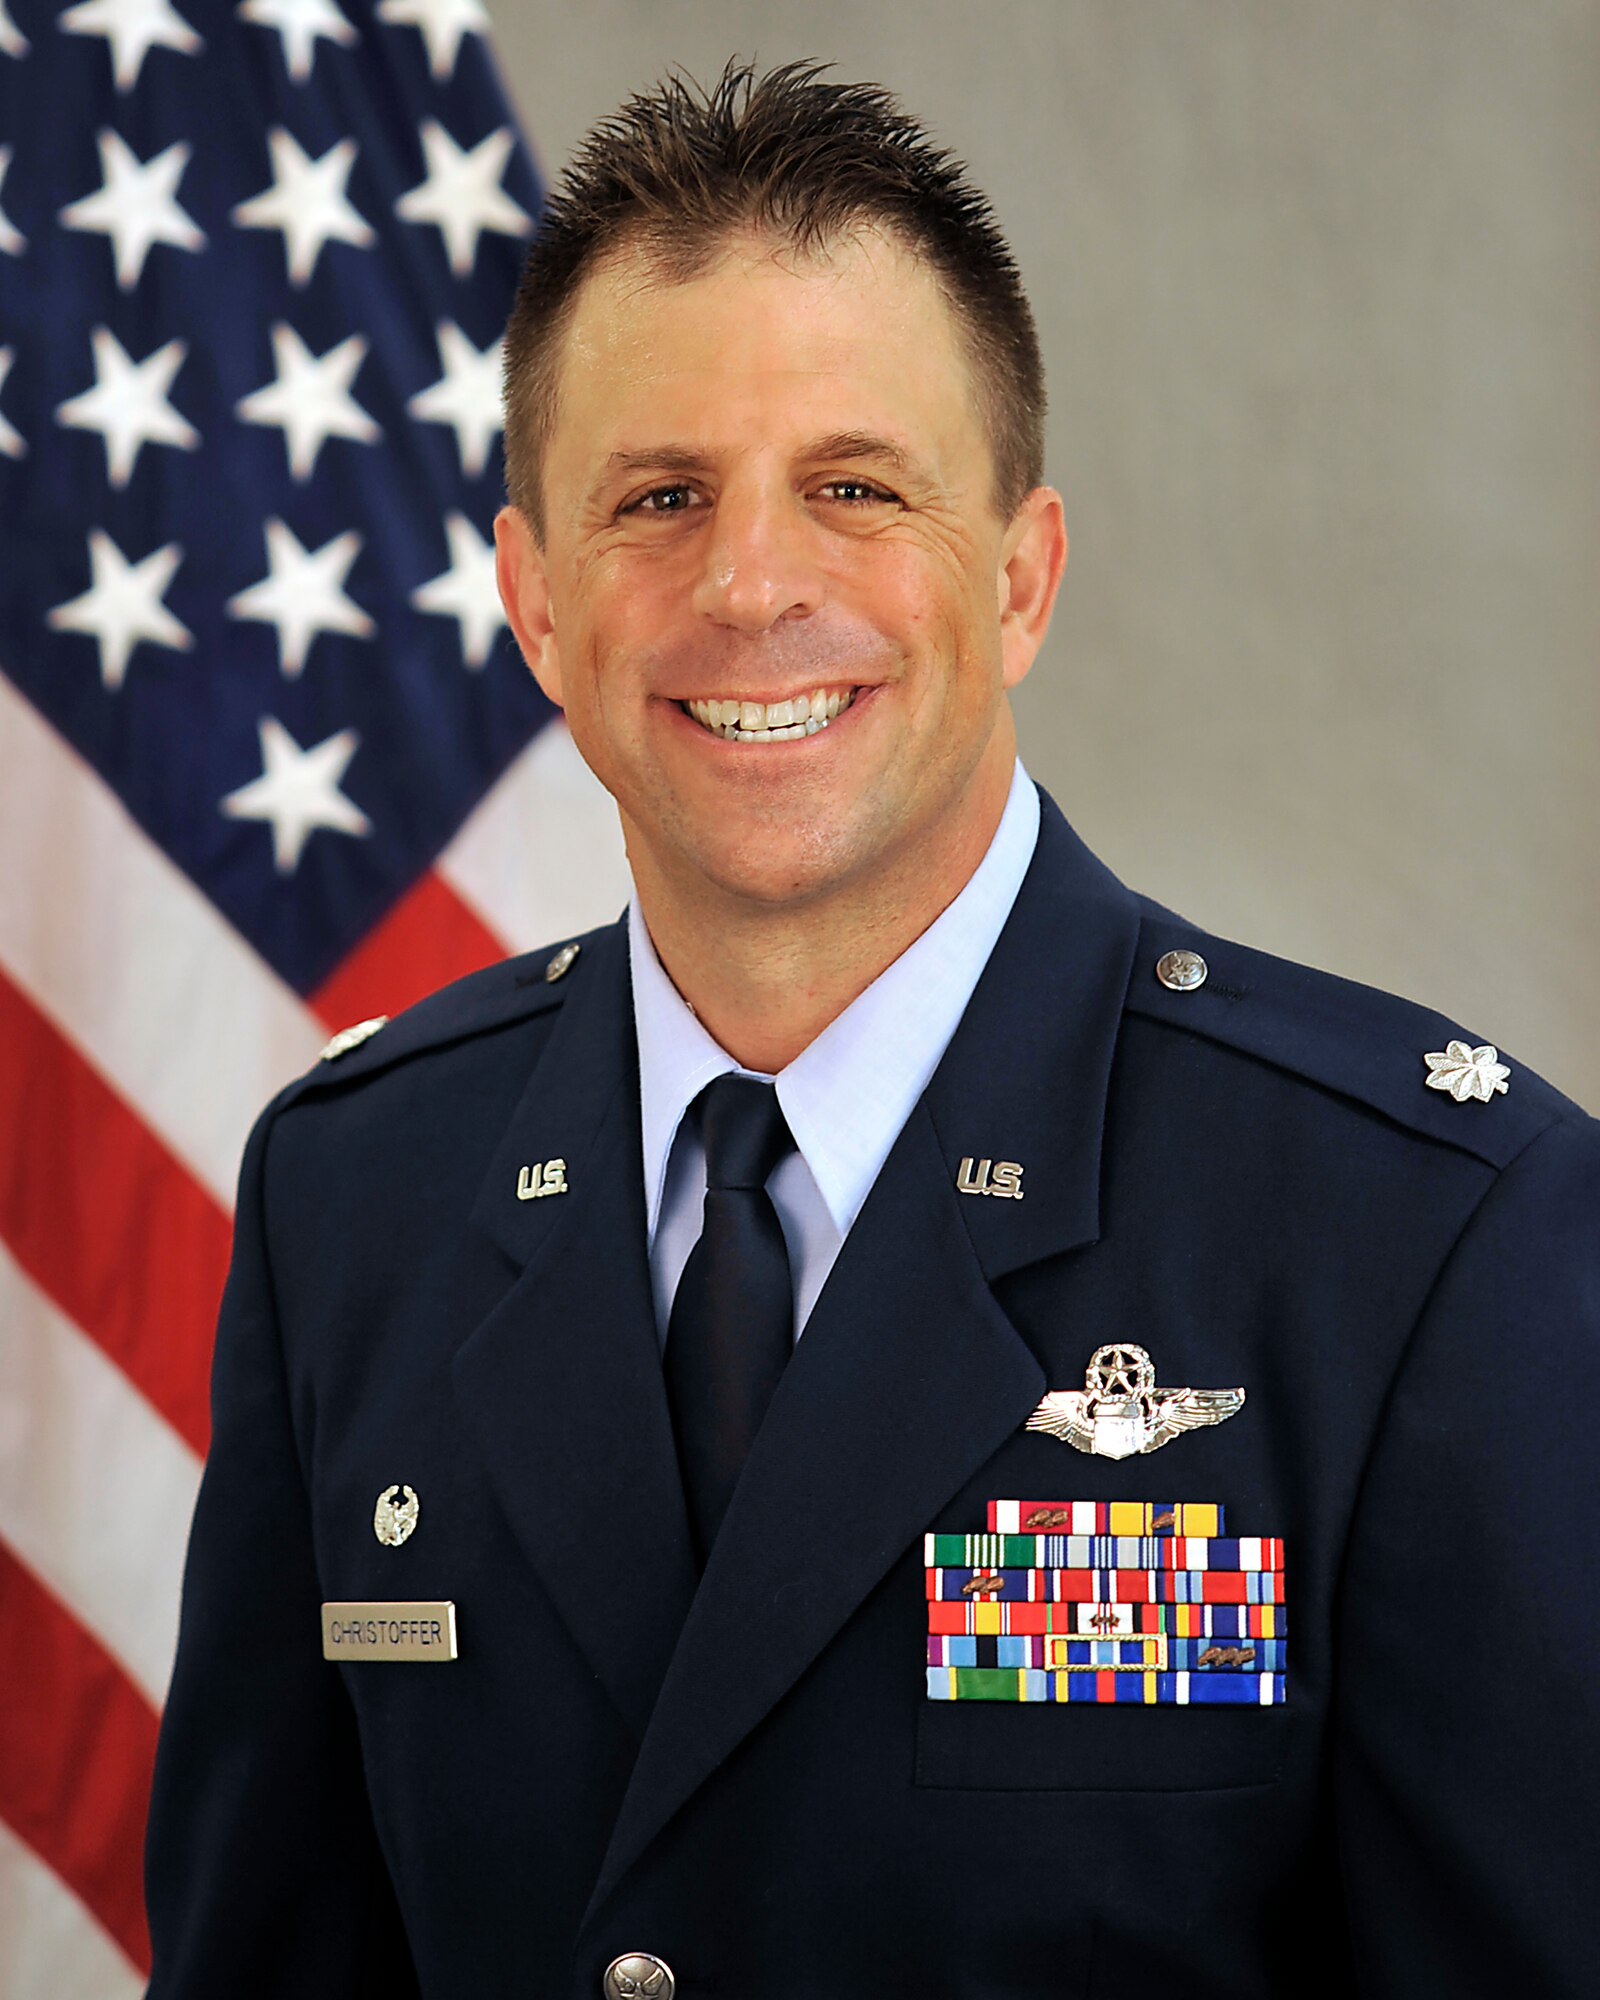 Lt. Col. Cory Christoffer reflects on his 20 years in the Air Force, and talks about what he thinks will make the Air Force a more cohesive unit. “It’s the little things that matter,” Christoffer said. “Giving a ride to an Airman walking across base, taking someone’s office garbage out, helping a peer through a fitness test, or even giving a smile, handshake, or verbal encouragement are just a few little things we can do to help each other as we work together to accomplish our mission.” (U.S. Air Force photo by Senior Airman Benjamin N. Valmoja)